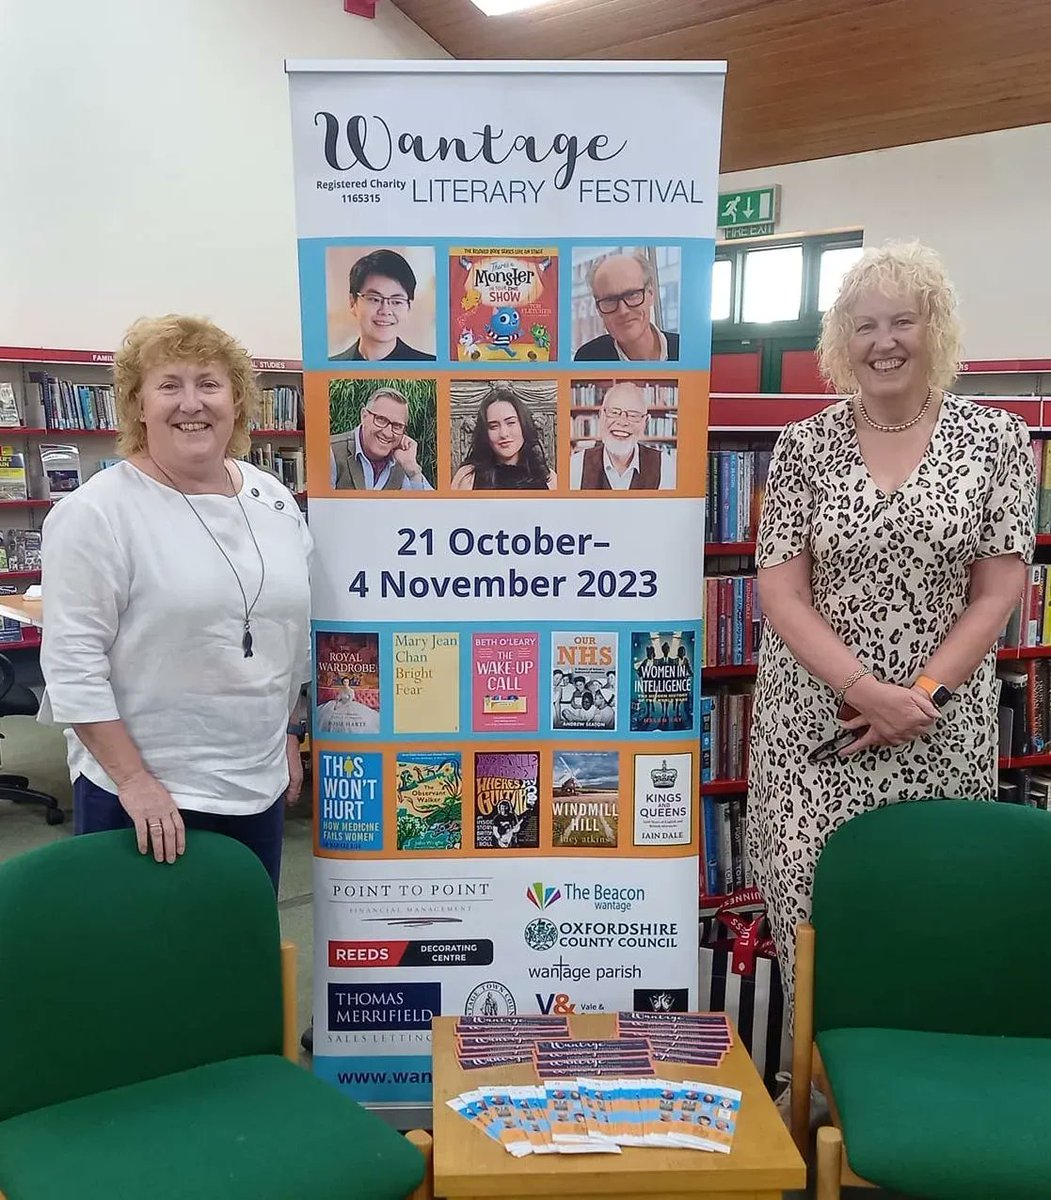 Come see us in the Wantage Library this Wednesday (20th Sept) to find out about this year's Festival and to buy your tickets! One of our fabulous volunteers, Ruth (left in the photo), will be there between 12-2pm to help. Alternatively you can book here: buff.ly/2OsnHmV